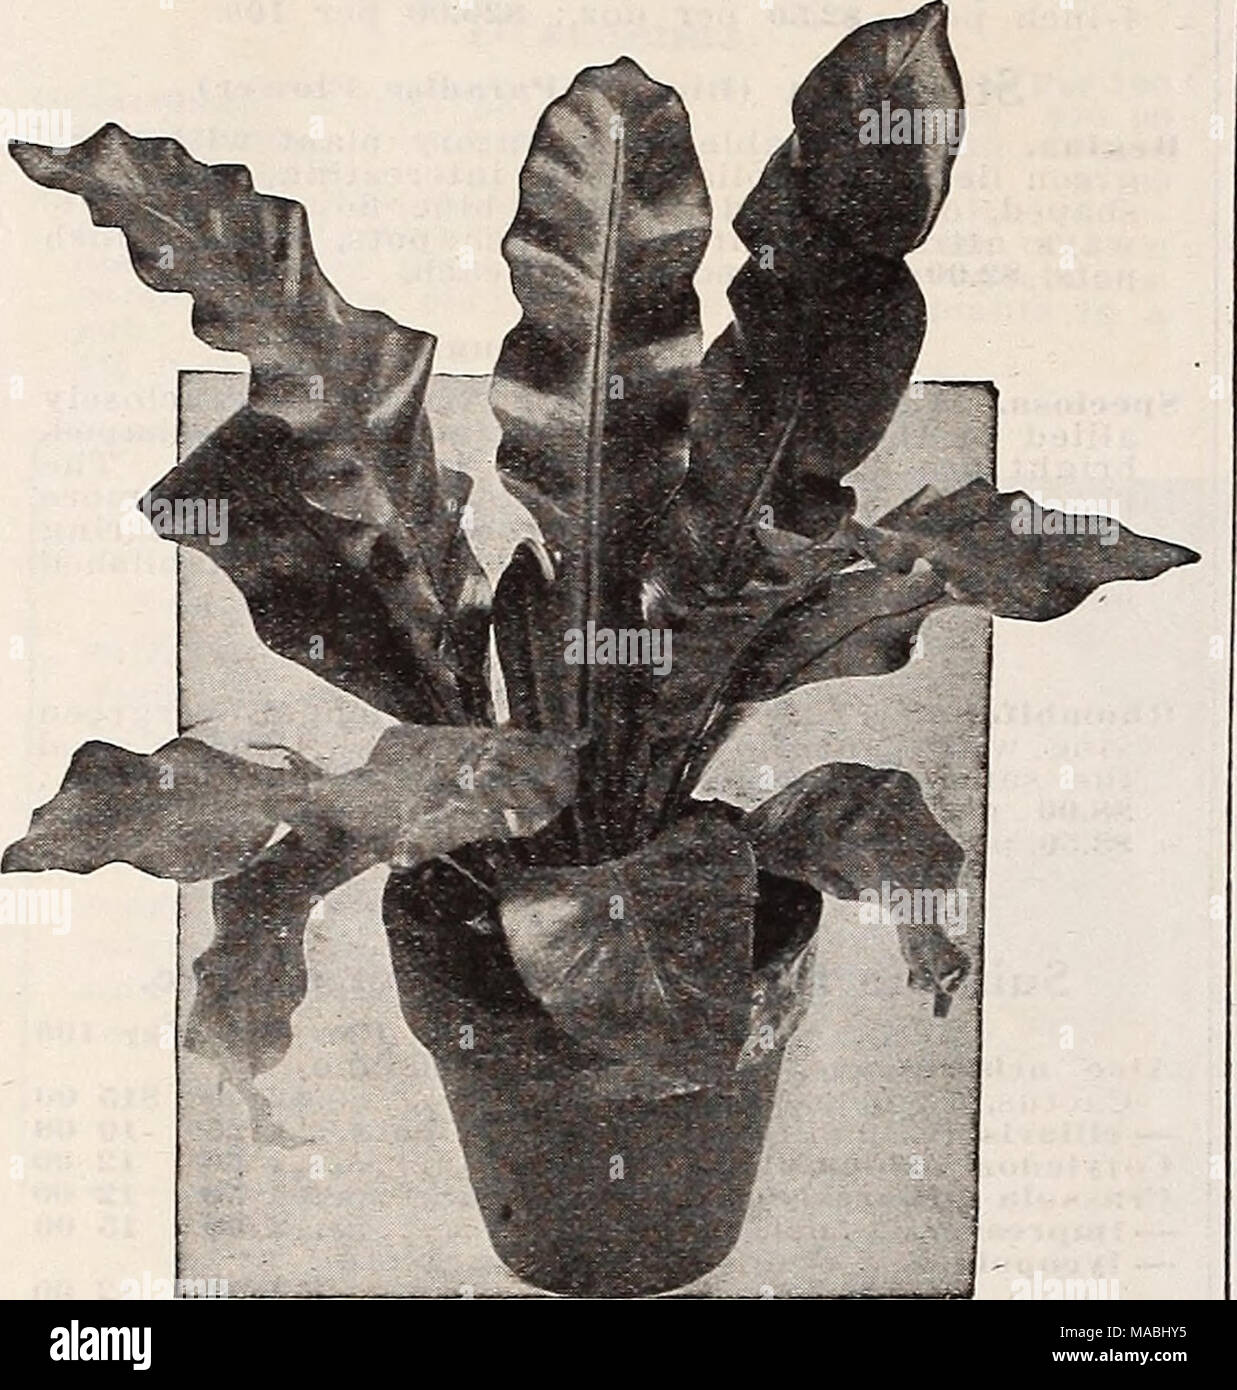 . Dreer's wholesale price list for florists : flower seeds plants and bulbs vegetable and lawn grass seeds sundries . Aspleniuni Nidus Avis (Bird's Nest Fern) Asplenium Nidus Avis (Bird's Nest Fern) A splendid, healthy, clean lot of plants. Thrifty young plants in 2%-inch pots, $3.50 per doz.; $25.00 per 100. 3-inch pots, $4.50 per doz.; $35.00 per 100. Cibotium Schiedei A beautiful lot of strong specimen plants, the finest we have yet sent out. Each Splendid 8-inch tubs $3 50 Splendid 10-inch tubs 5 00 Cyrtomium Rochfordianum compactum (The Improved Holly Fern) Per 100 Per 1000 We offer a fin Stock Photo